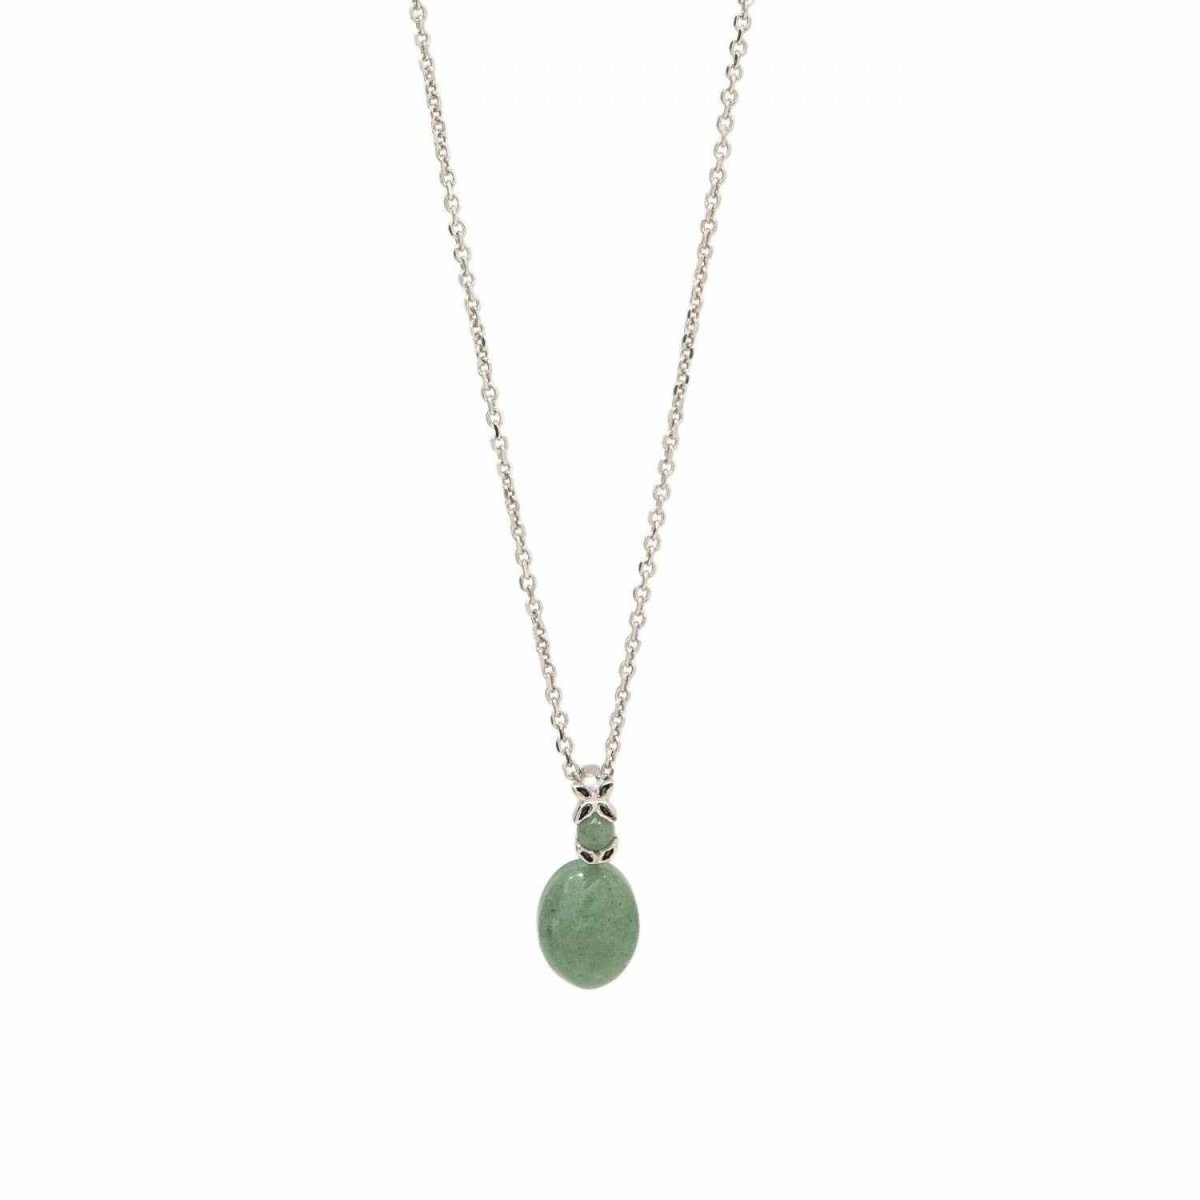 Necklace - Necklaces with stones in green jadeite silver tone